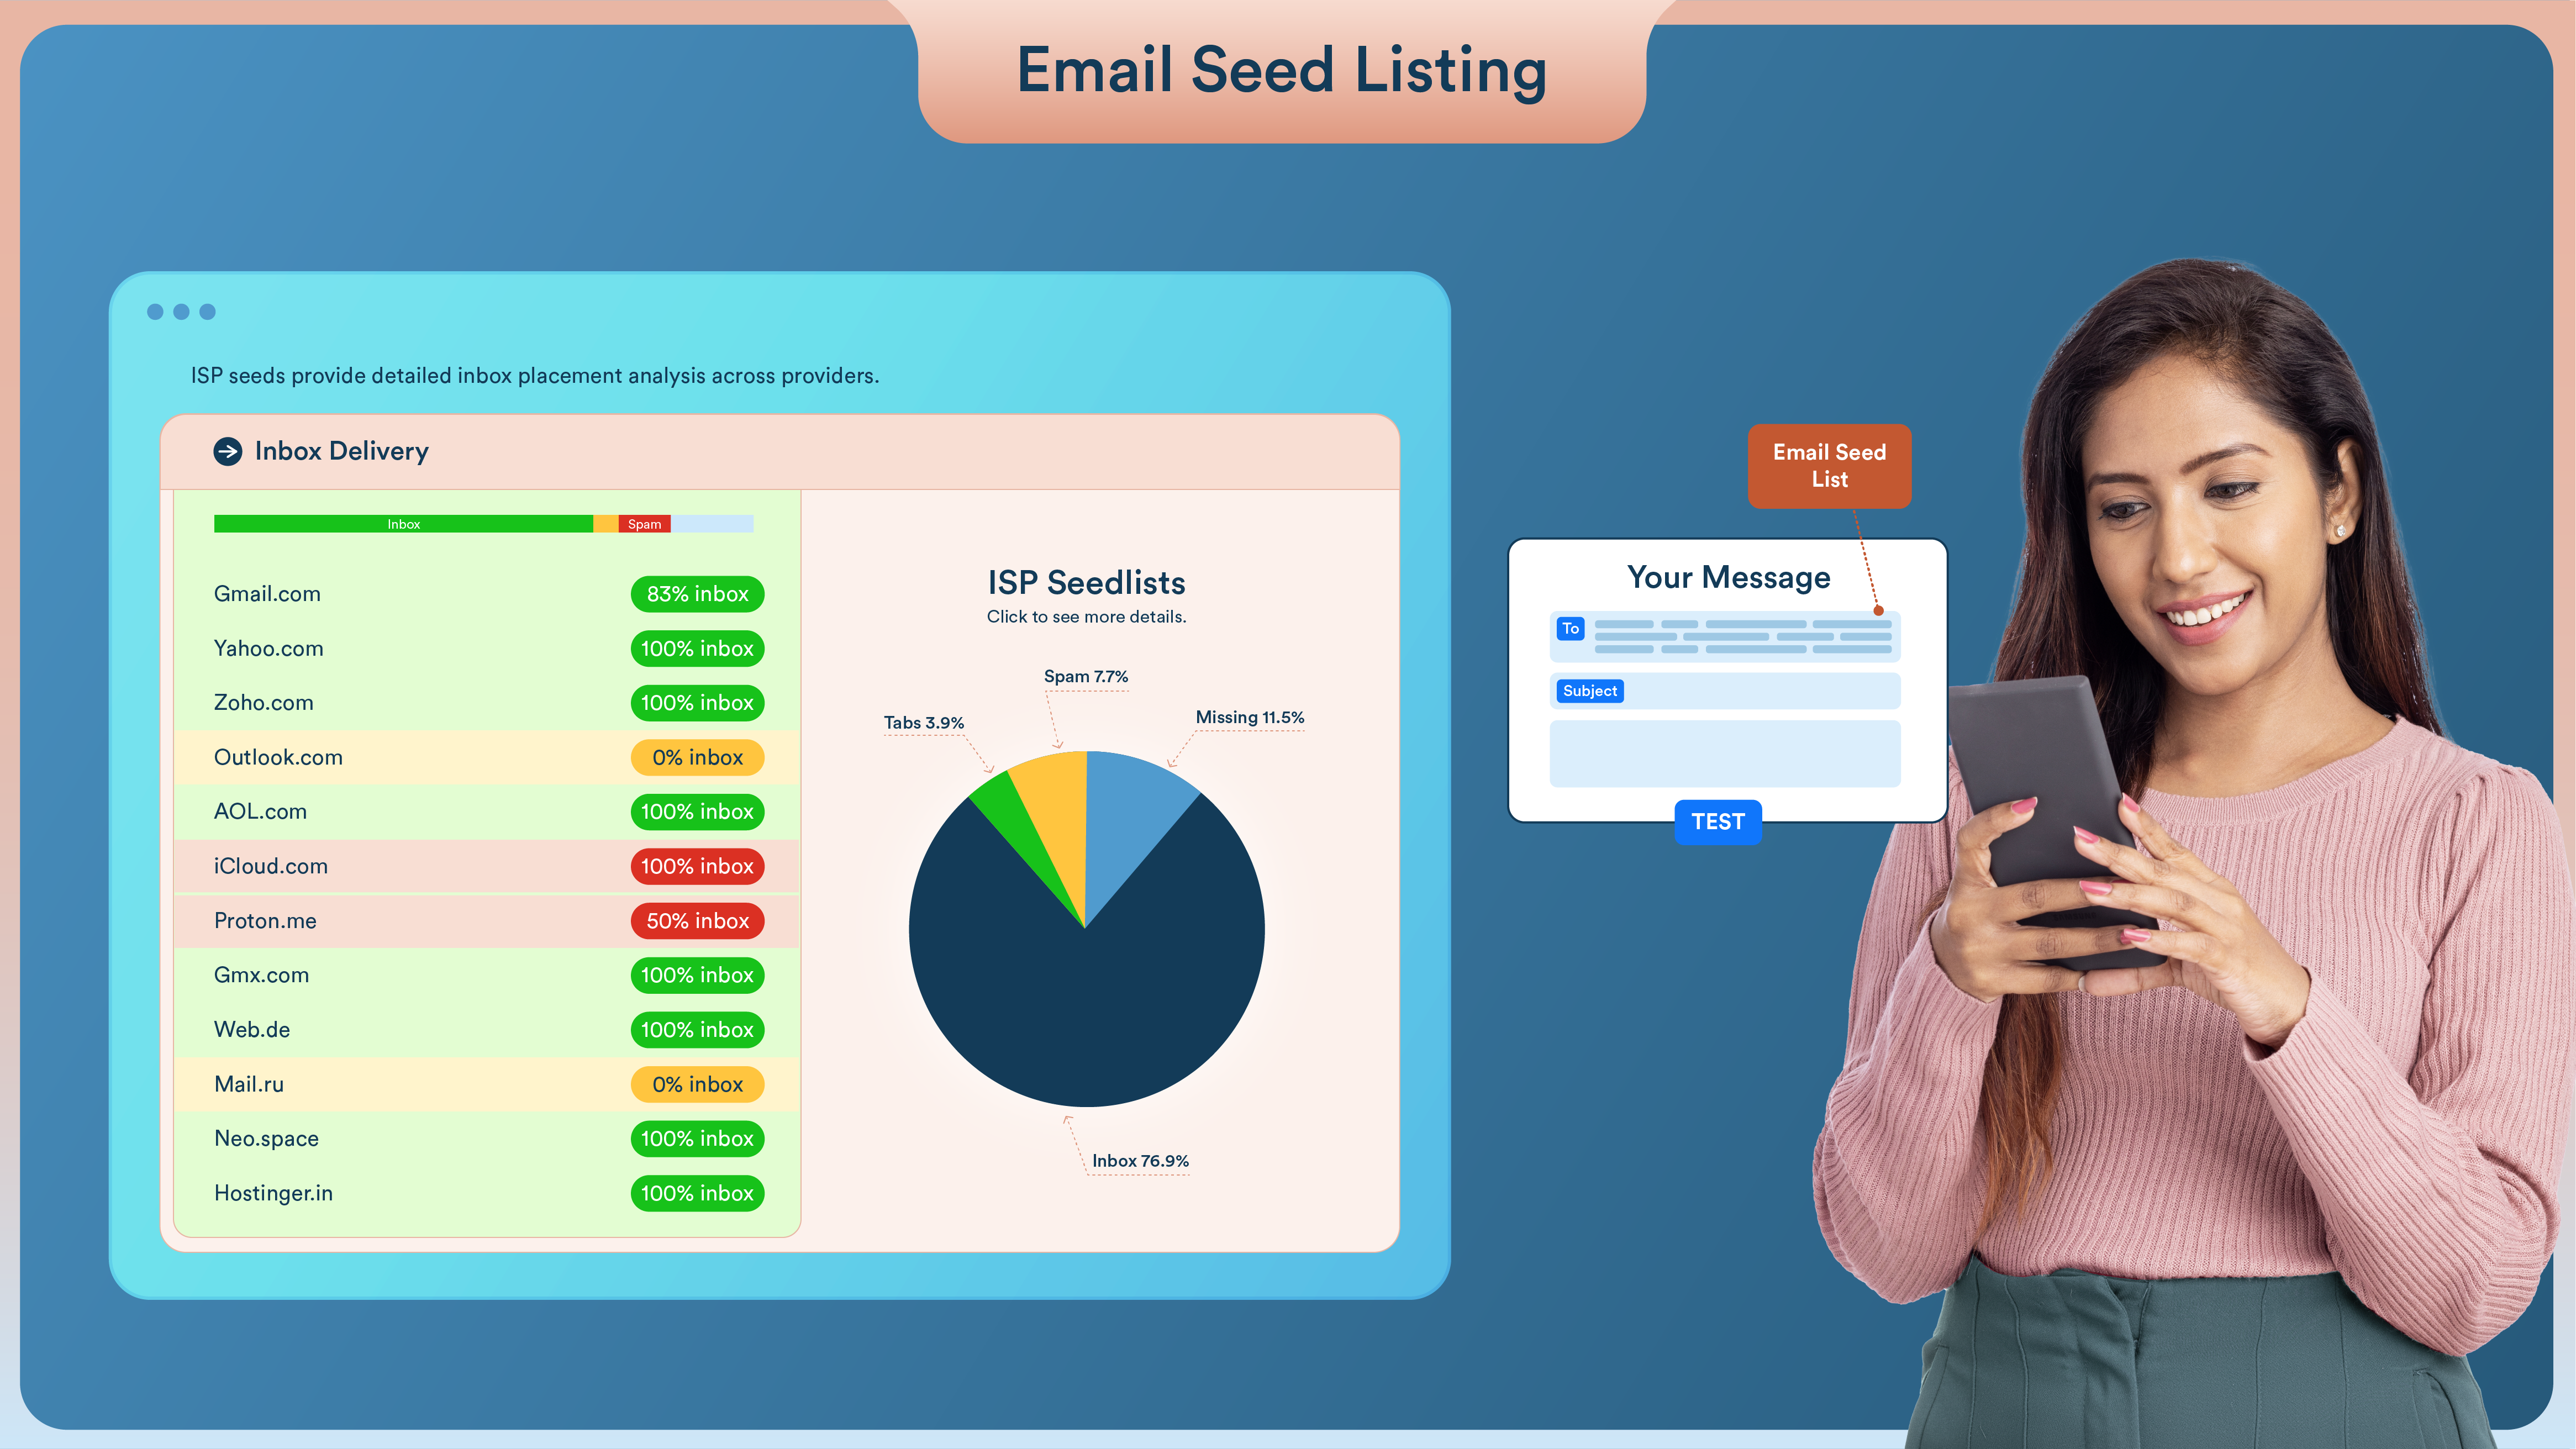 Email Seed Listing